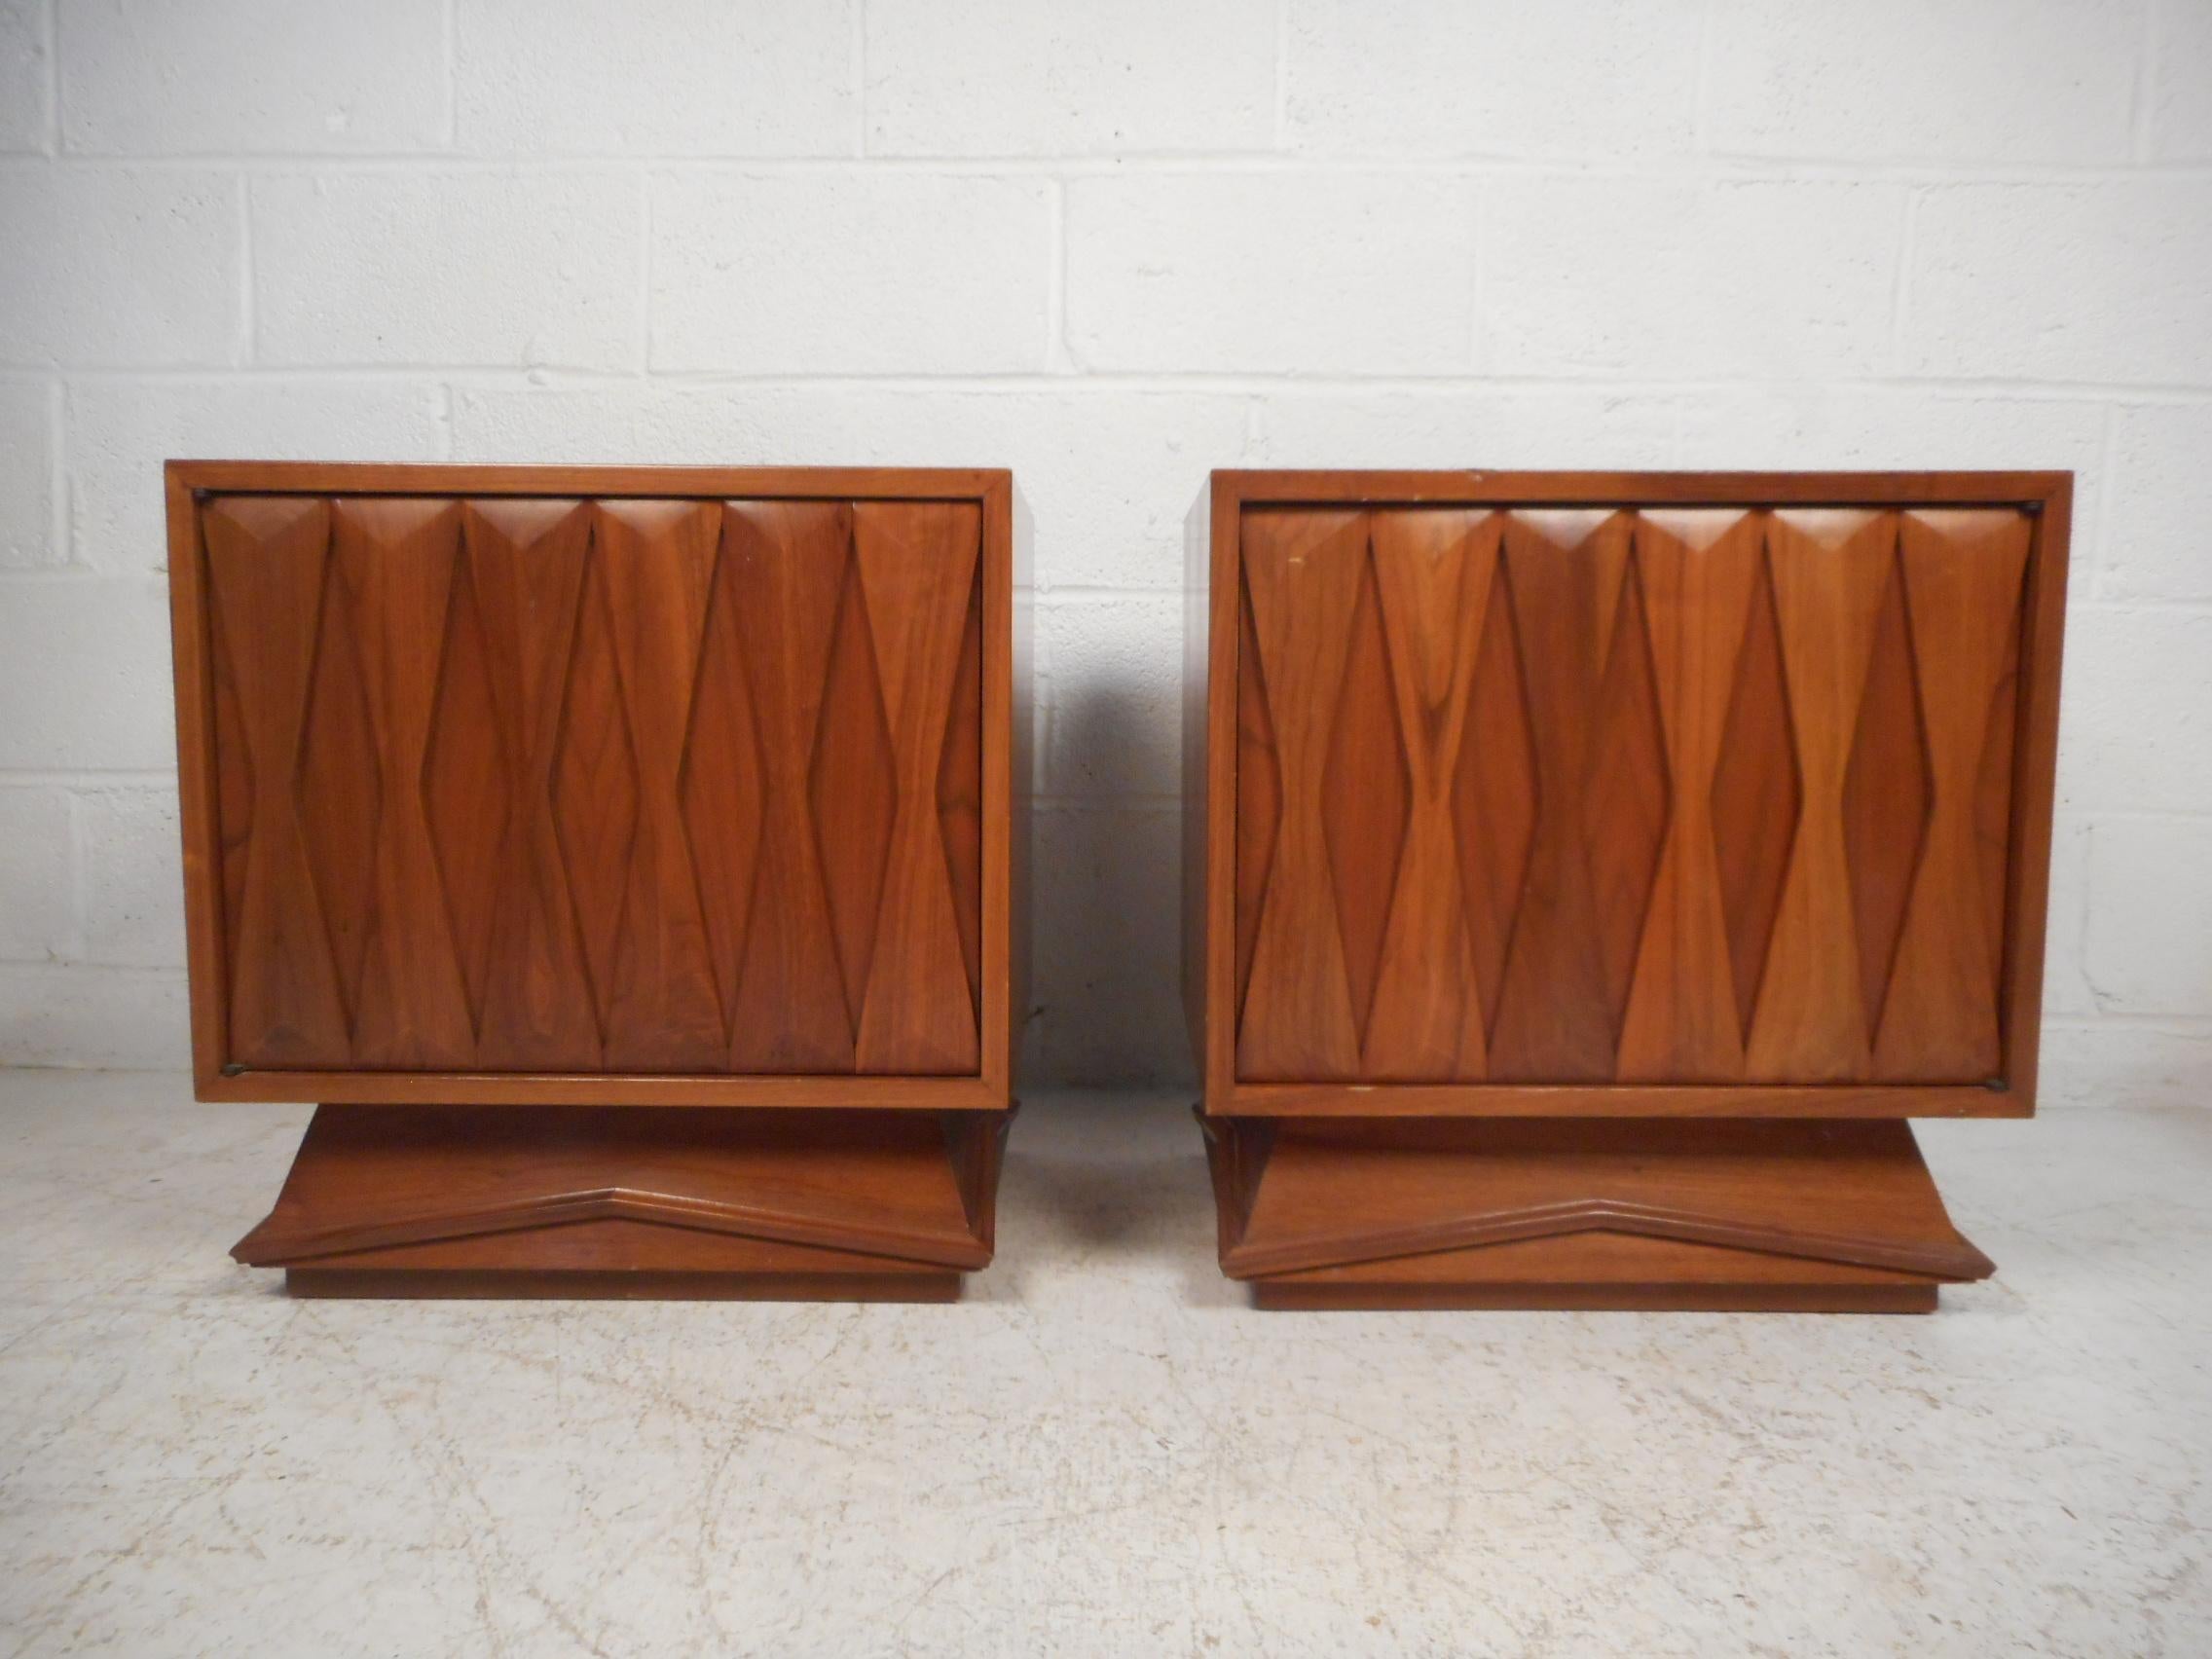 Nice pair of Mid-Century Modern nightstands. Eye-catching bowtie accents cover the front of the cabinet doors. Adjustable shelves on the interiors. This pair is sure to be a great addition to any modern interior. Please confirm item location with